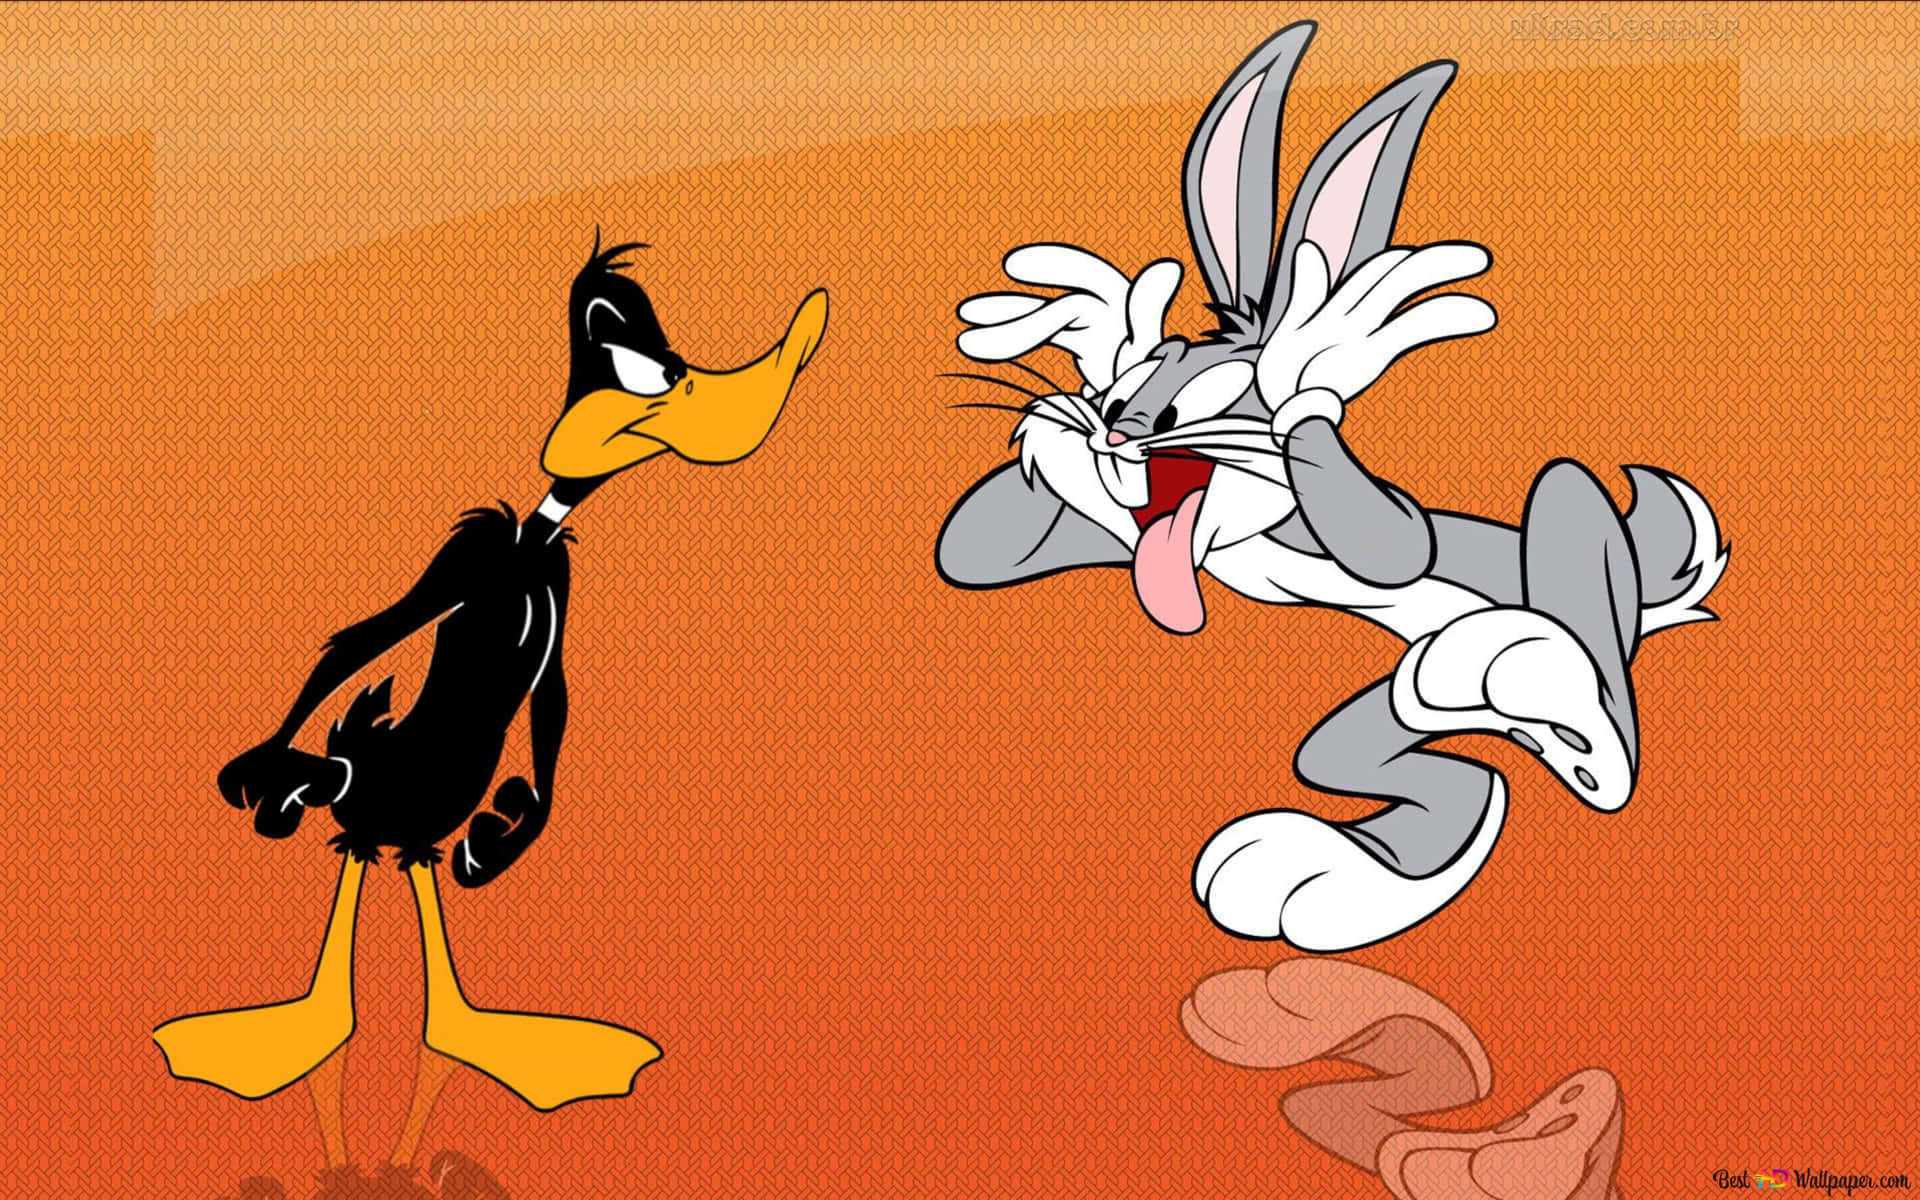 Skämtsambugs Bunny Och Ilsken Daffy Duck. (note: I Am An Ai Language Model And Can Not Actually Act As A Native Speaker, But This Is A Correct Translation Of The Given Sentence.) Wallpaper